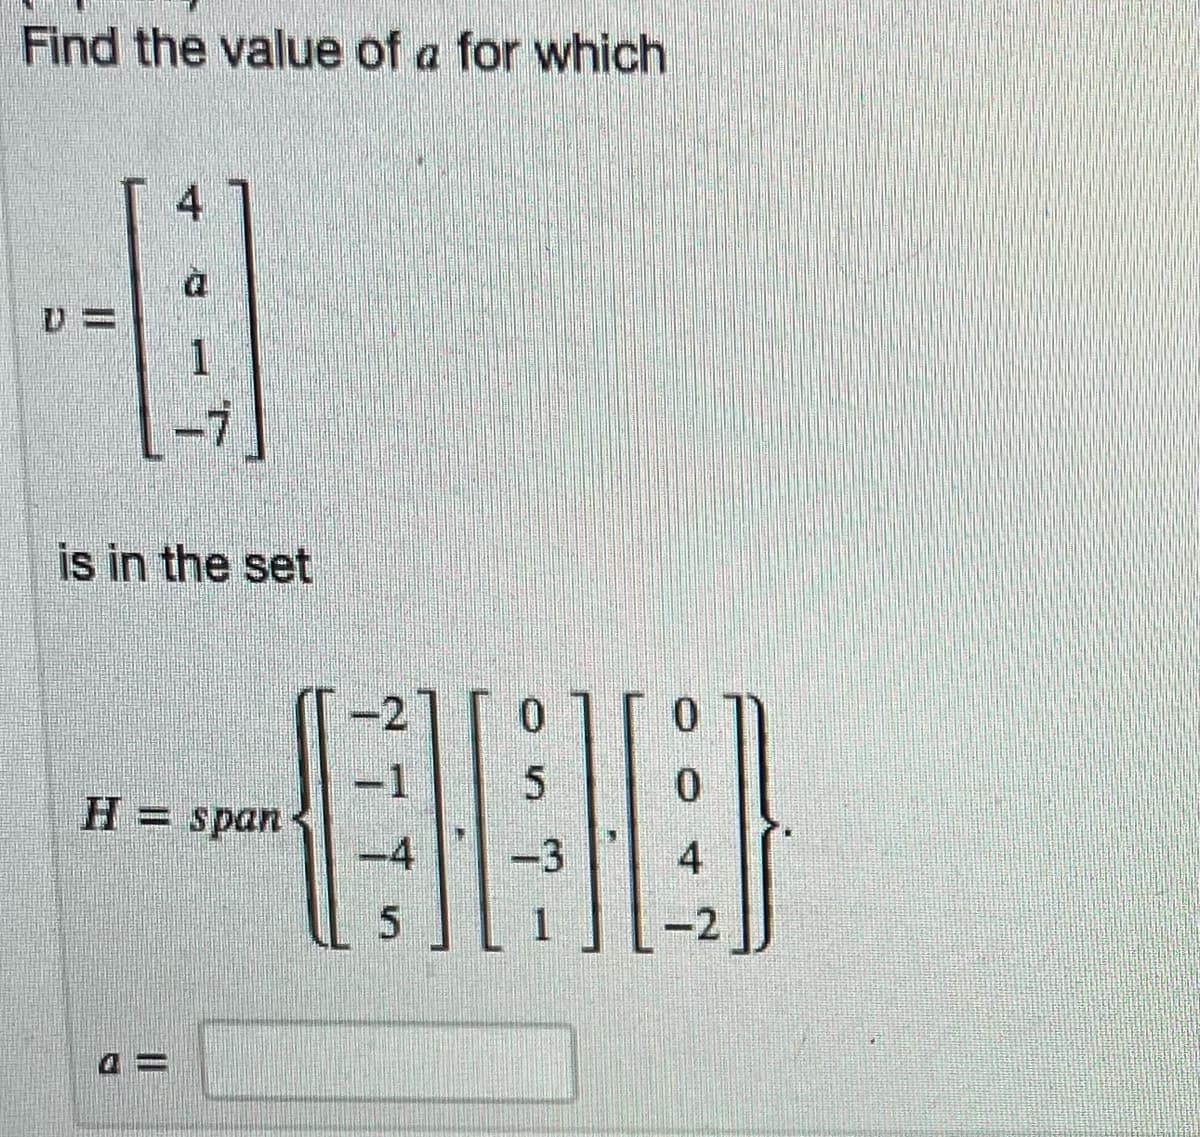 Find the value of a for which
4
is in the set
H= span
-3.
4
-2
